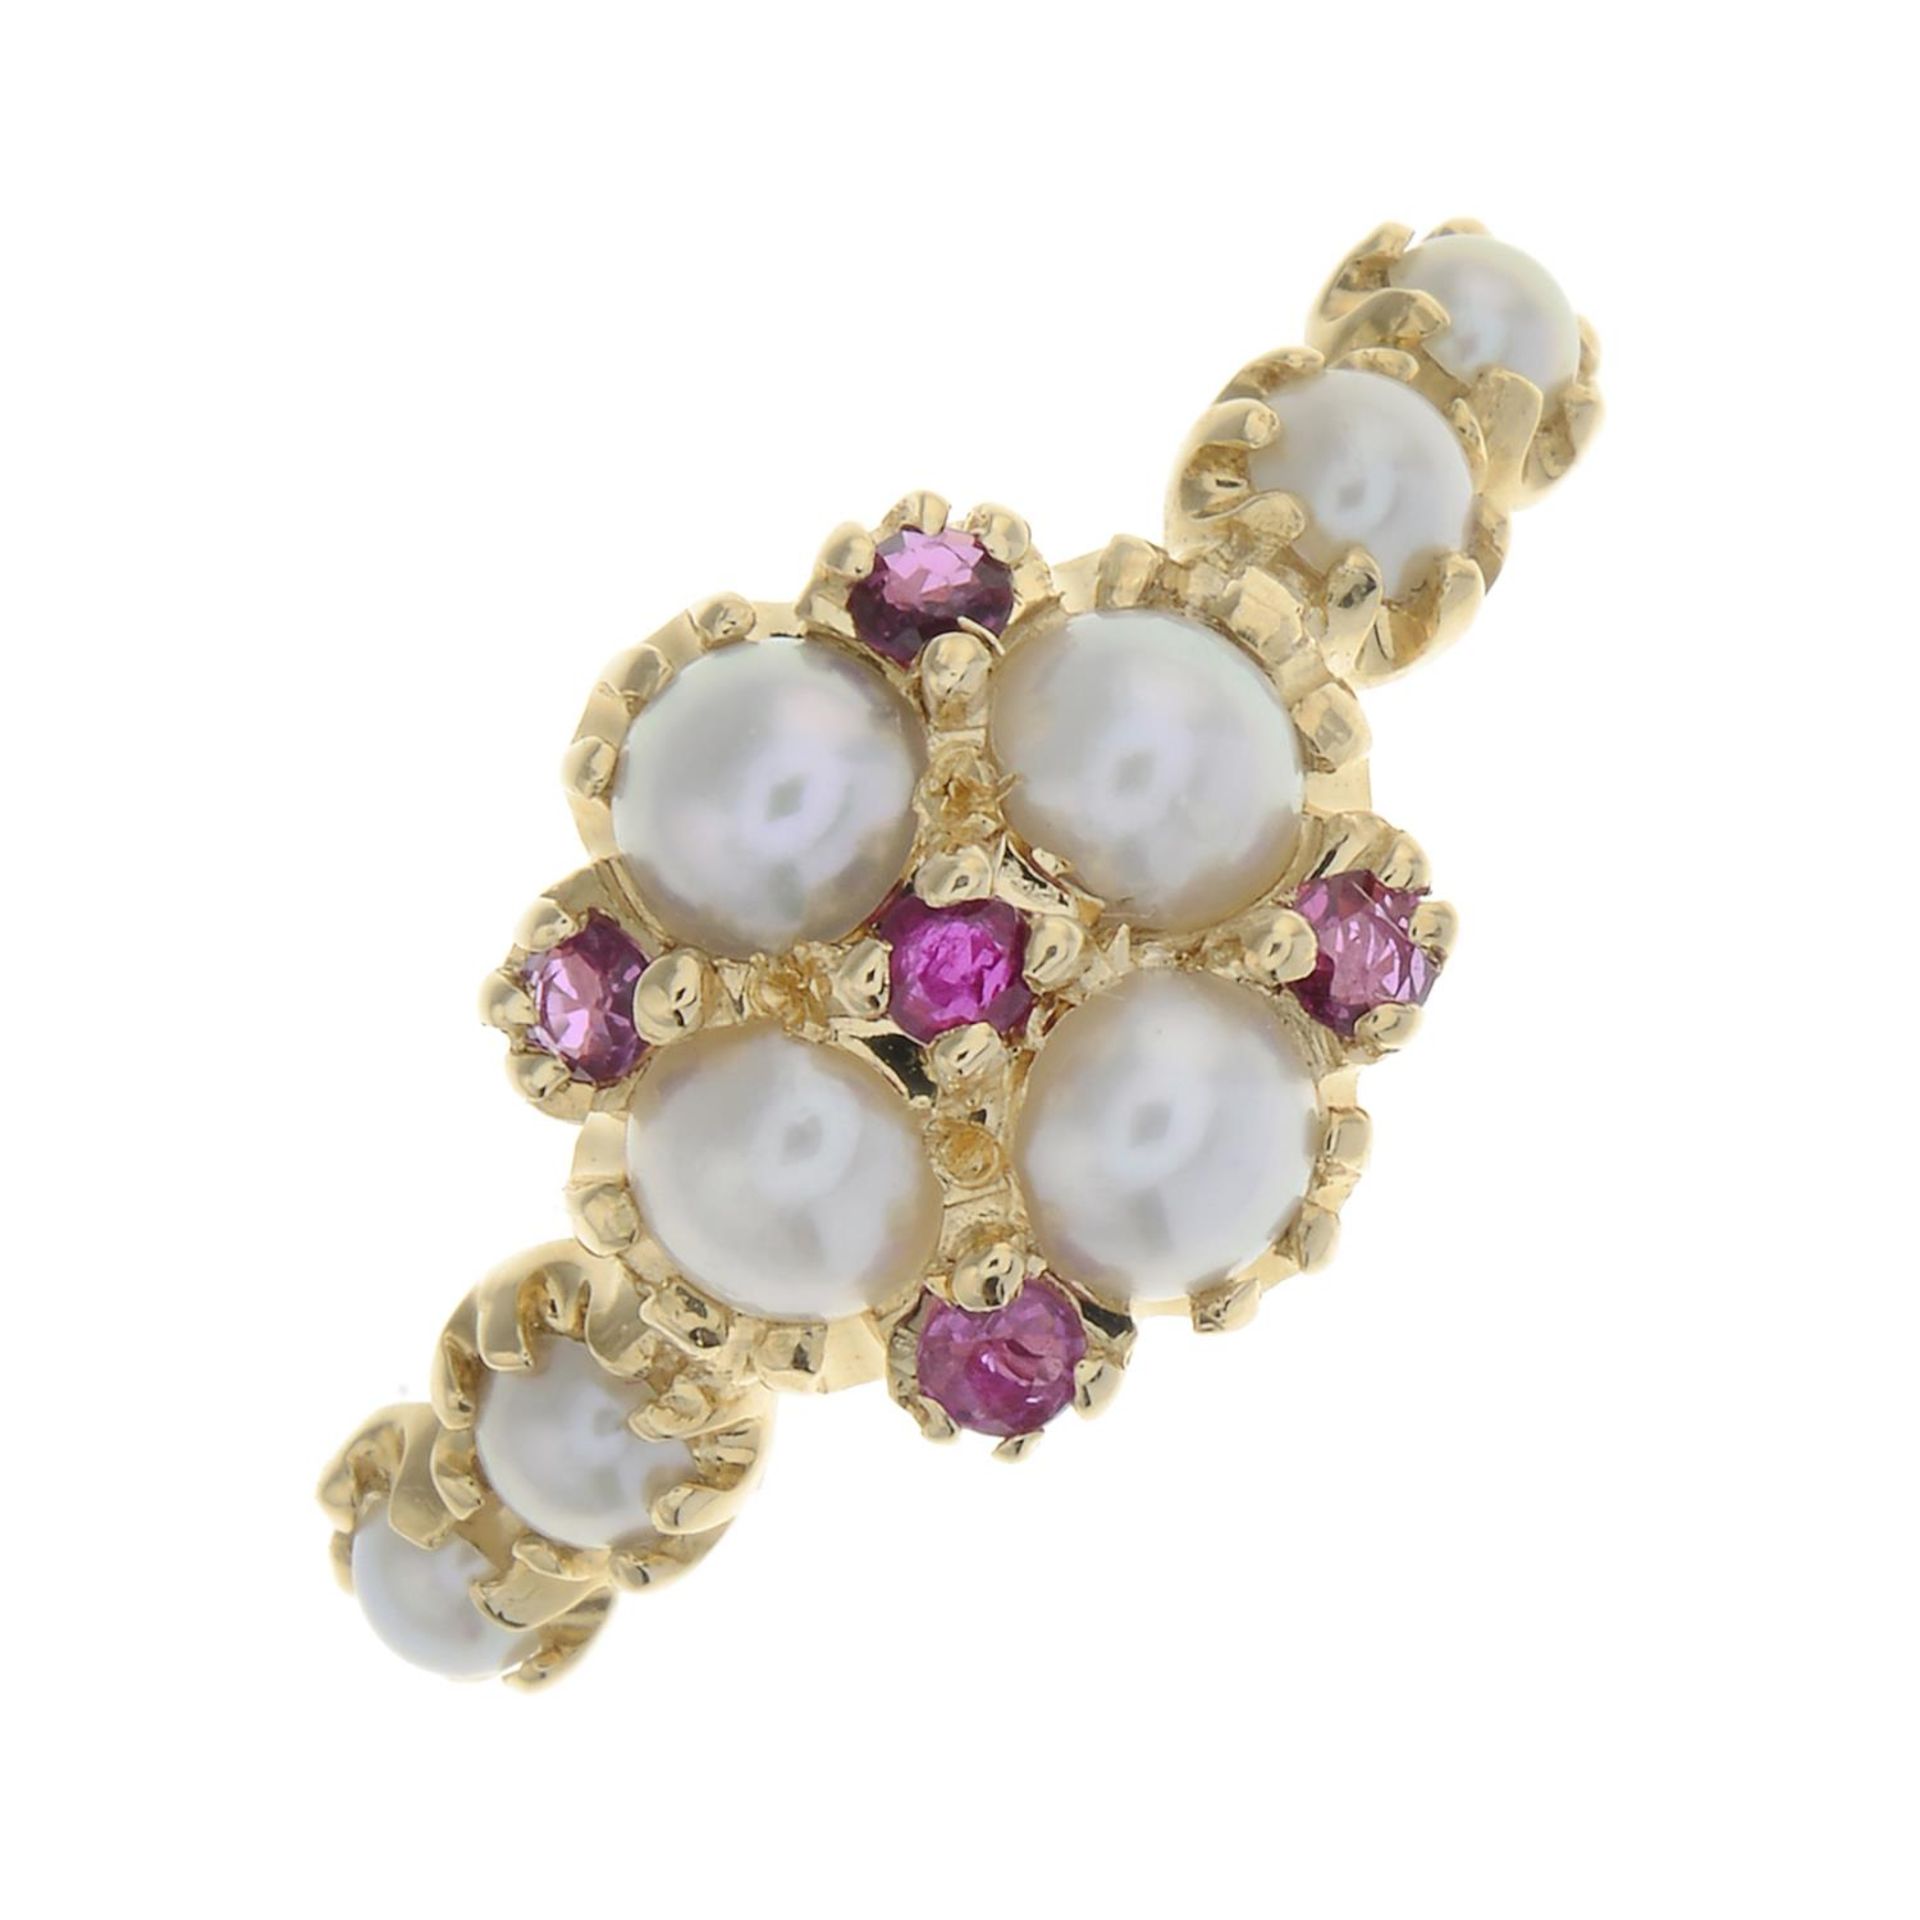 A 14ct gold split pearl and ruby dress ring.